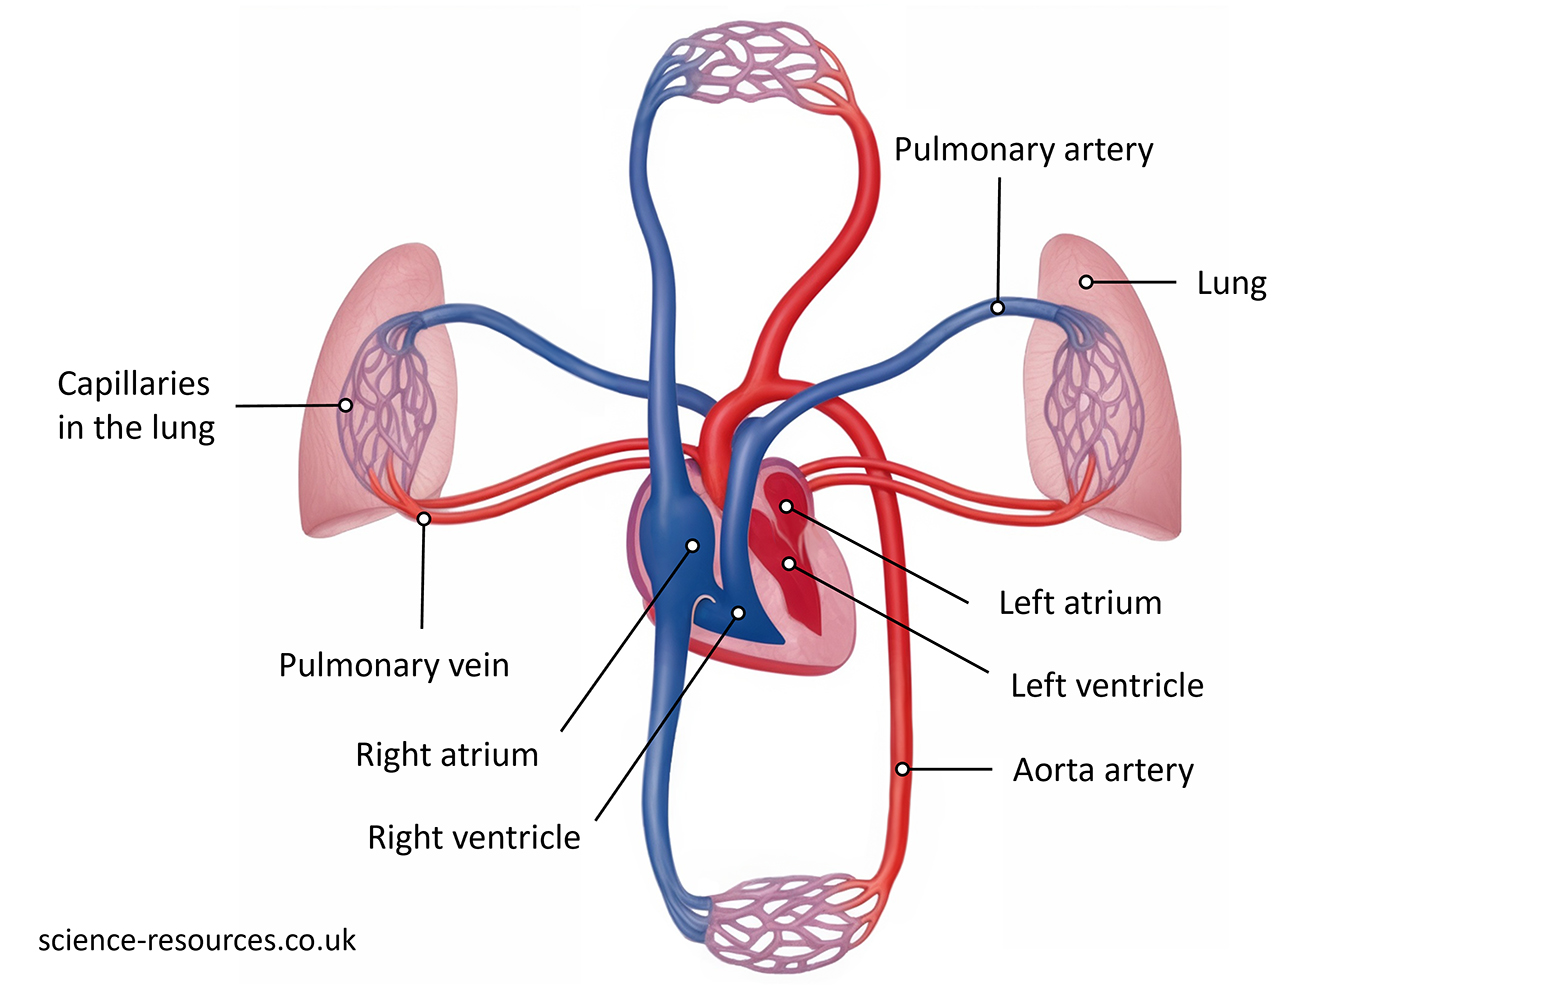 This image is a detailed diagram of the human heart and its connection to the lungs, showcasing various parts and their names. 